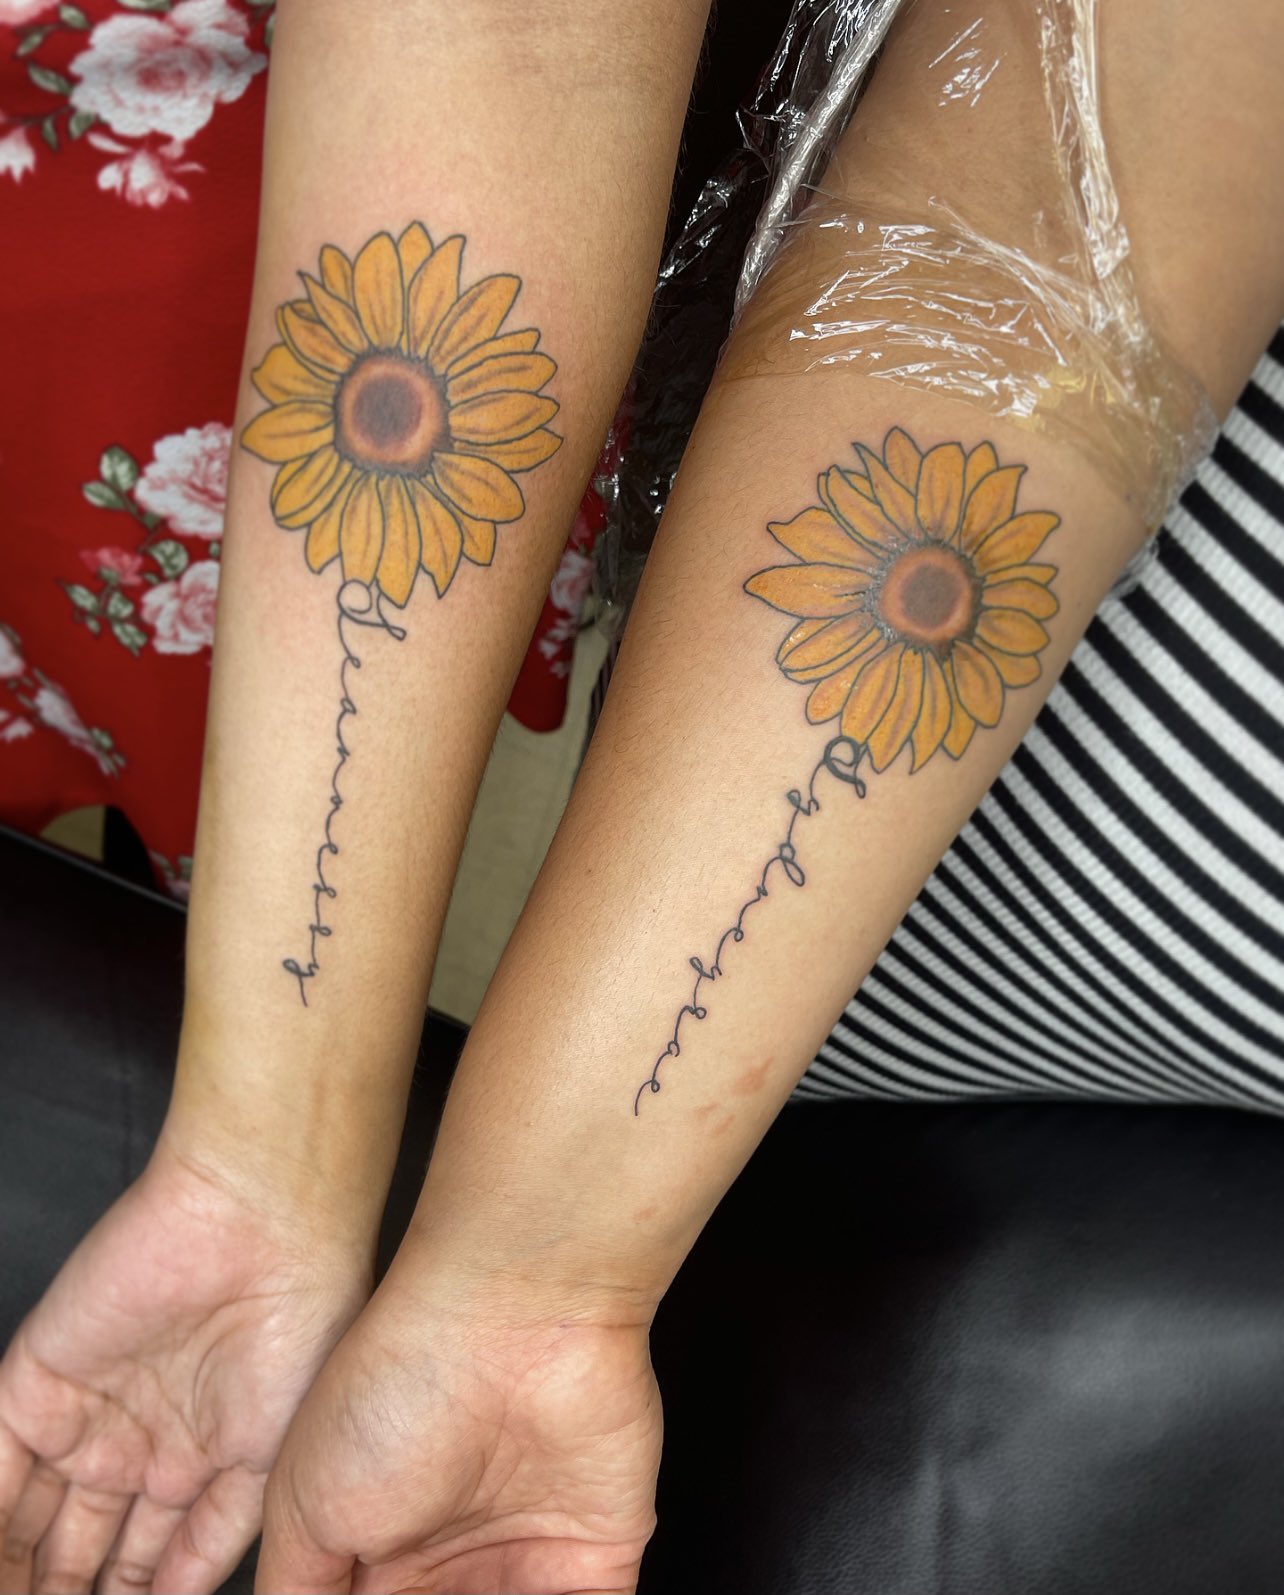 inkedbybleu on Twitter did this sister tattoo yesterday they got  each others names they were so happy with the end result   httpstcoM7YIhUmMCv  Twitter